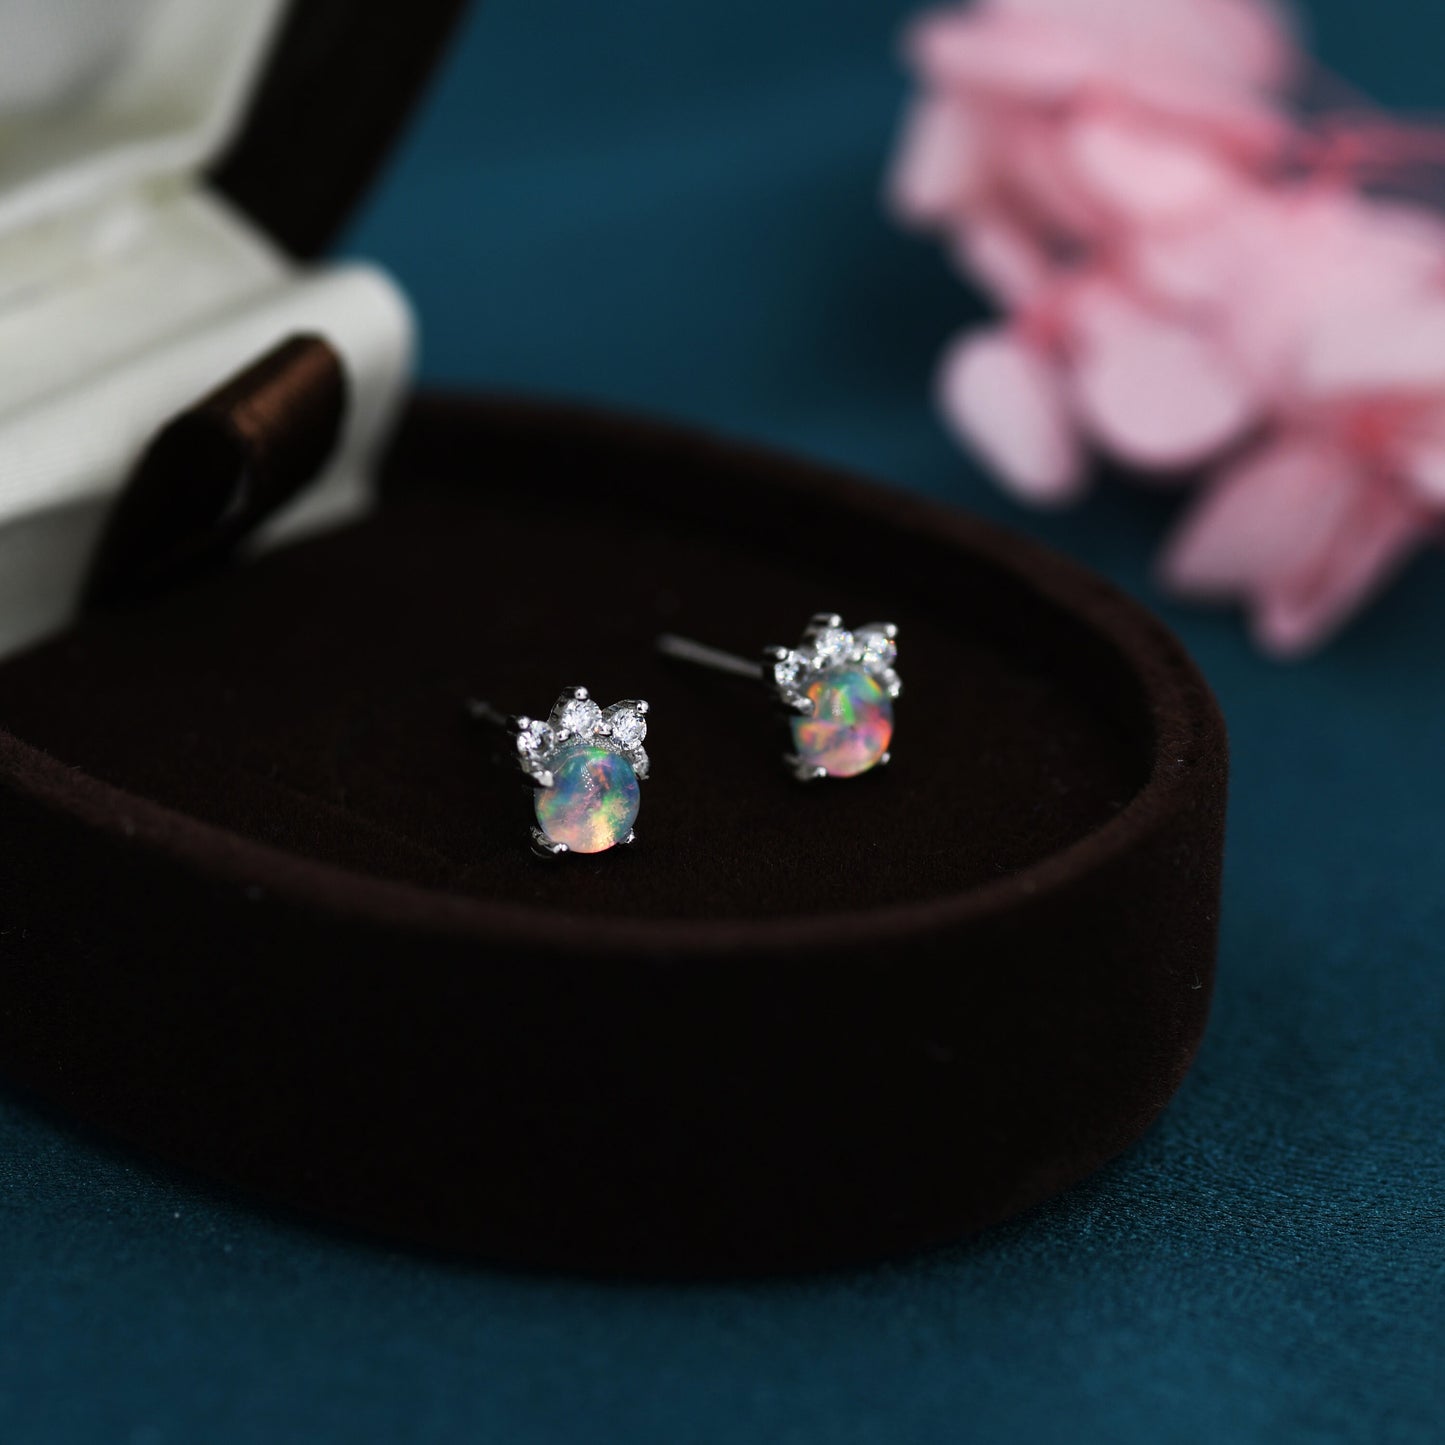 Tiny Opal with CZ Stud Earrings in Sterling Silver, Silver, Gold or Rose Gold, Vintage Inspired Design, Opal Crown Earrings Crown Stud